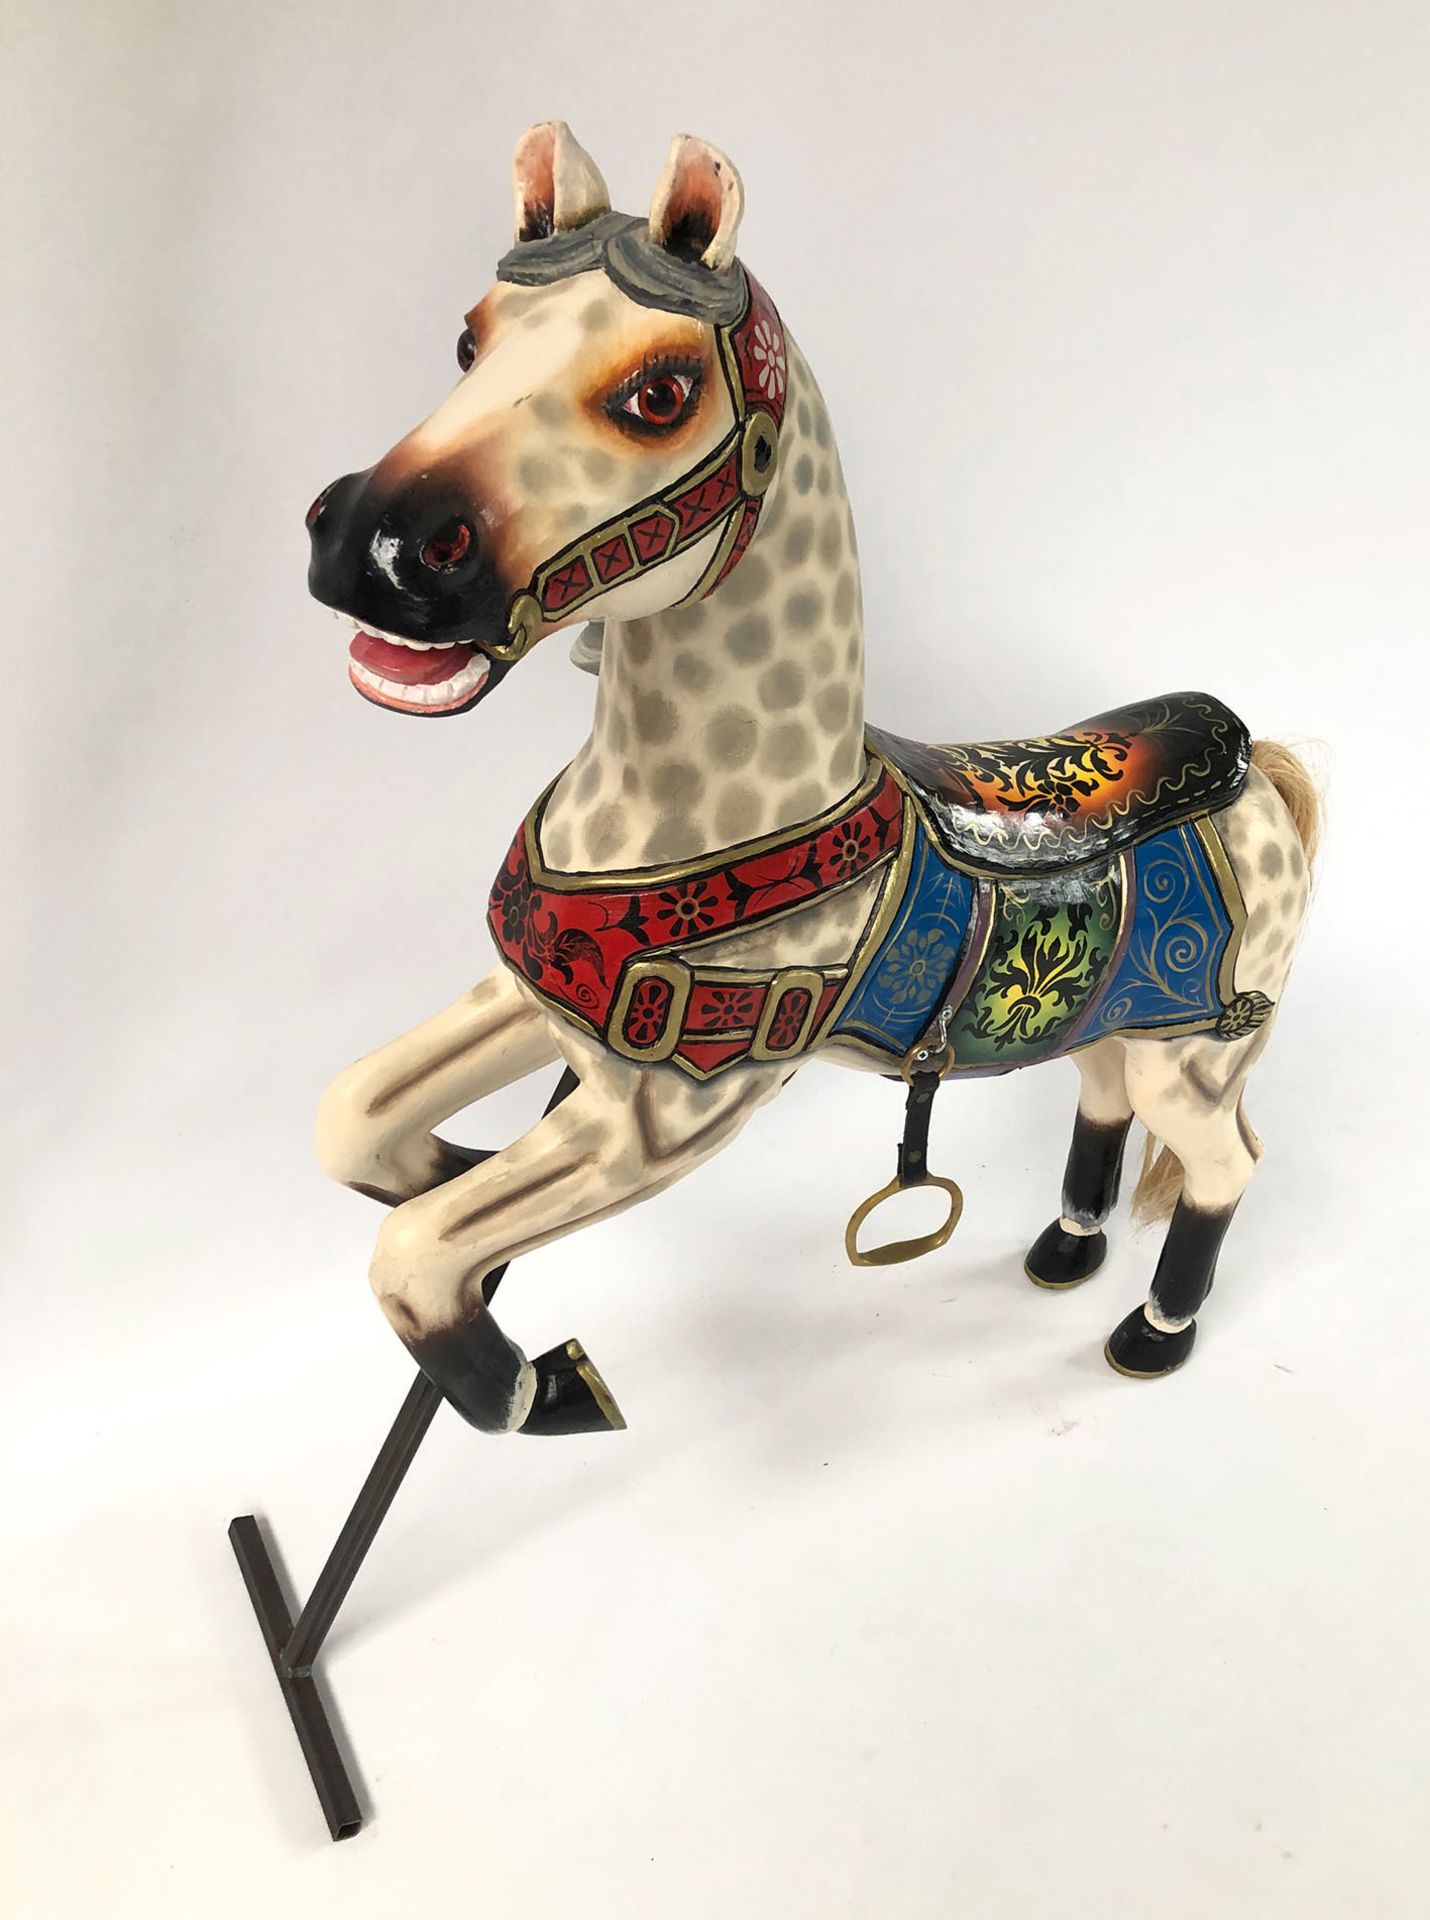 Wooden Carousel Horse from Later Half of 20th Century - Image 4 of 4